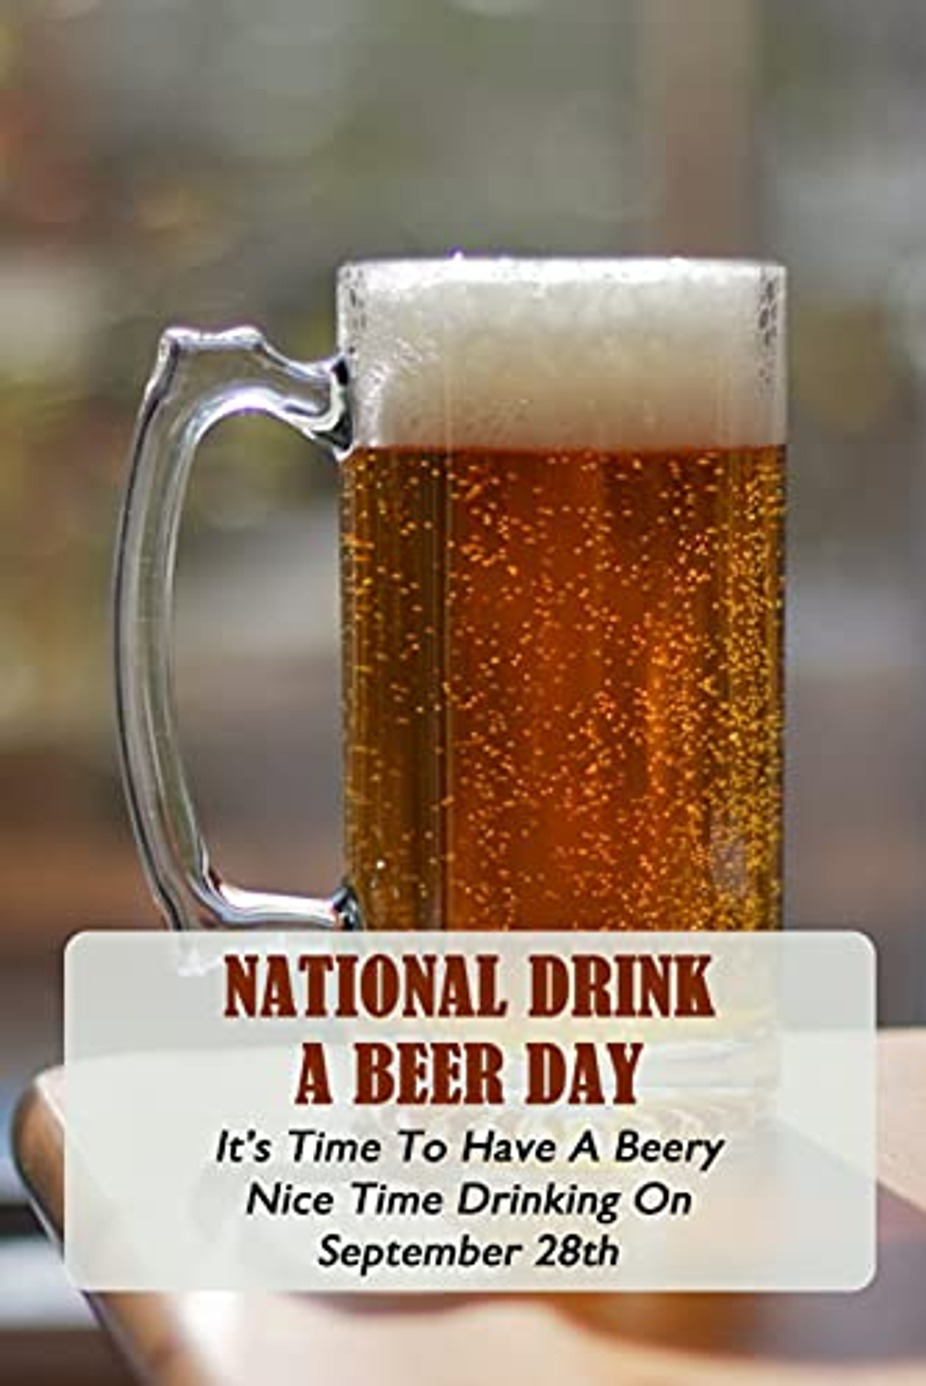 National Drink Beer Day event photo